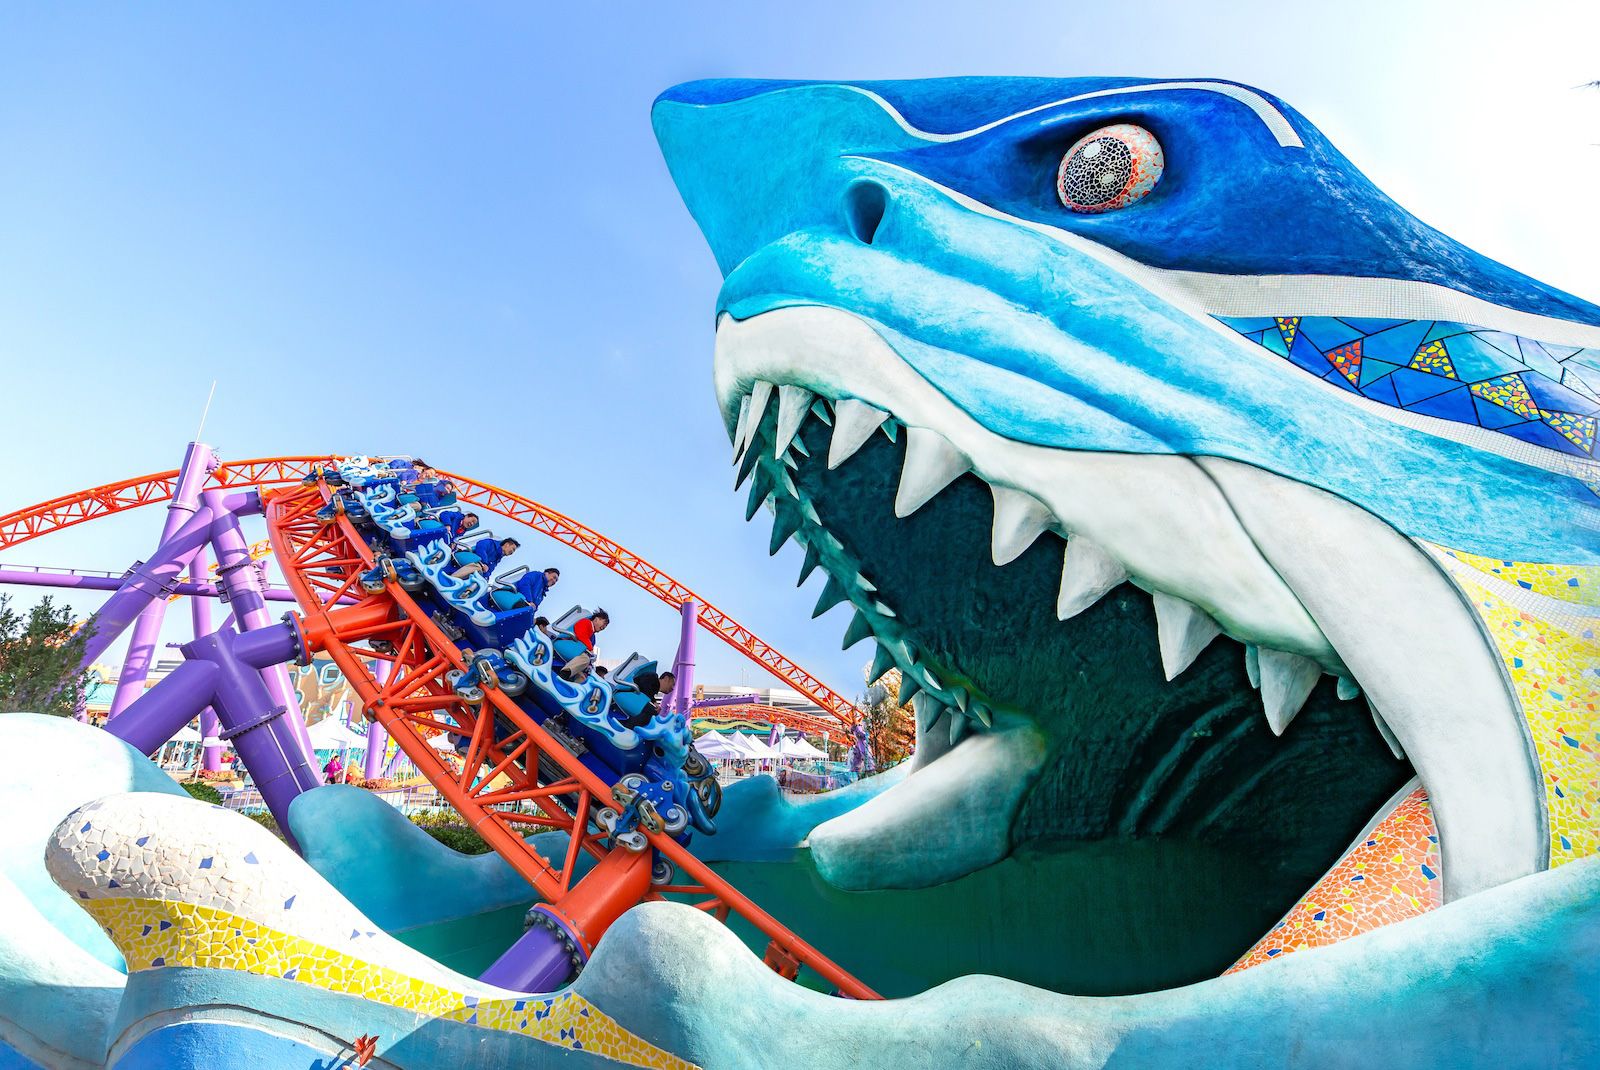 What it's like to be a theme park designer